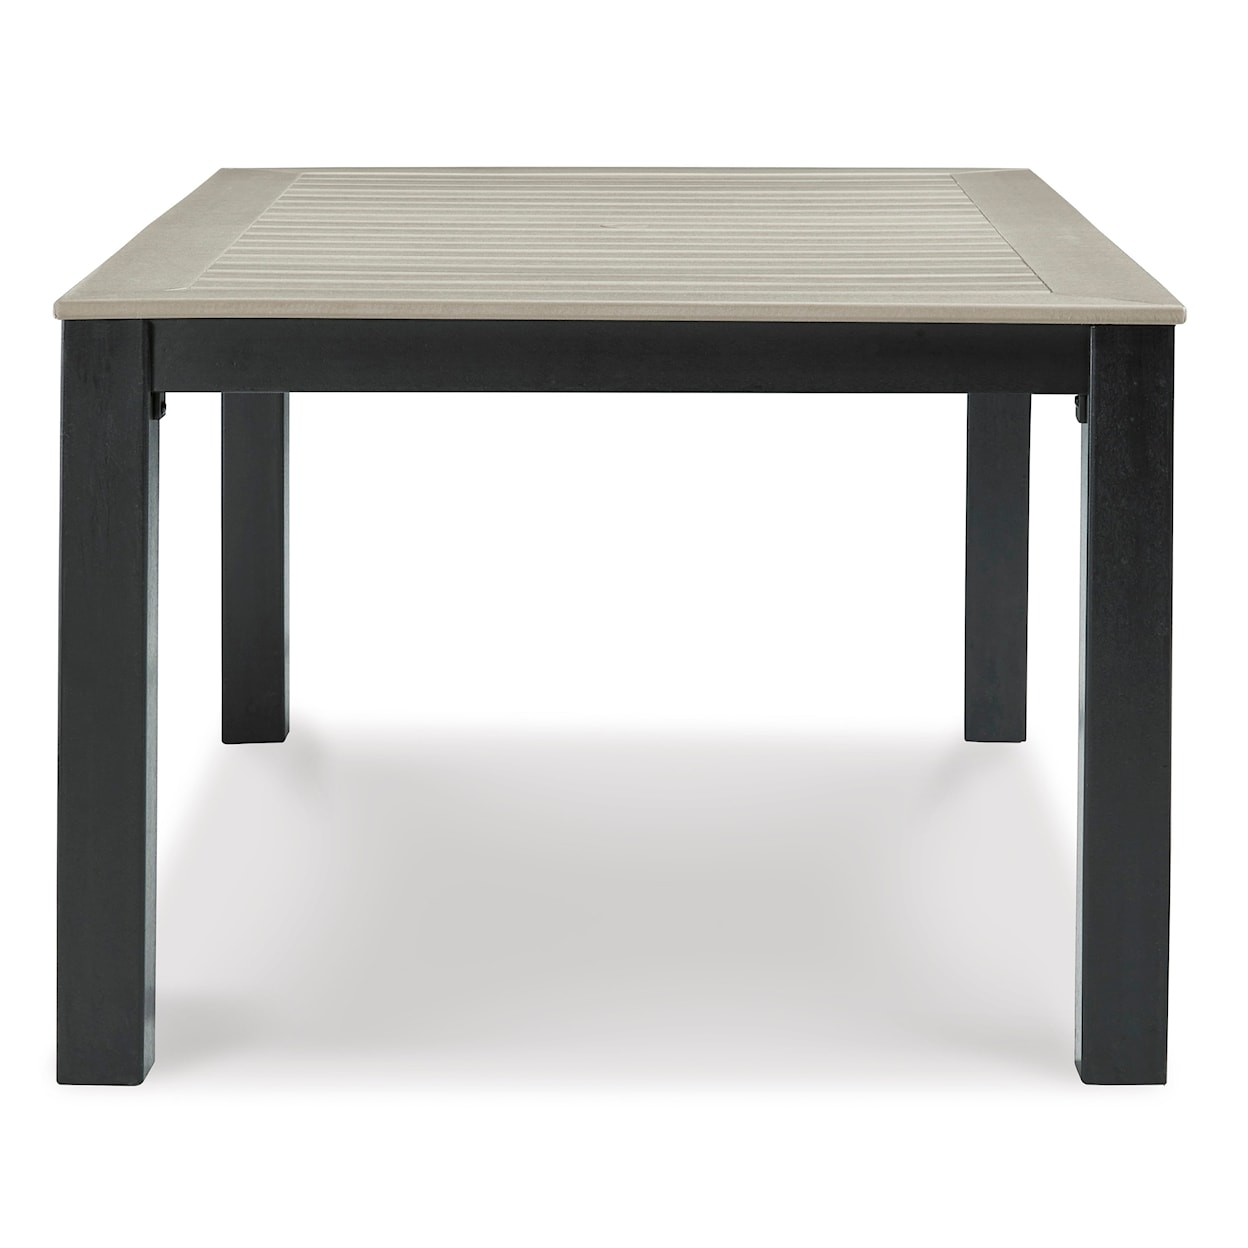 Signature Design Mount Valley Outdoor Dining Table